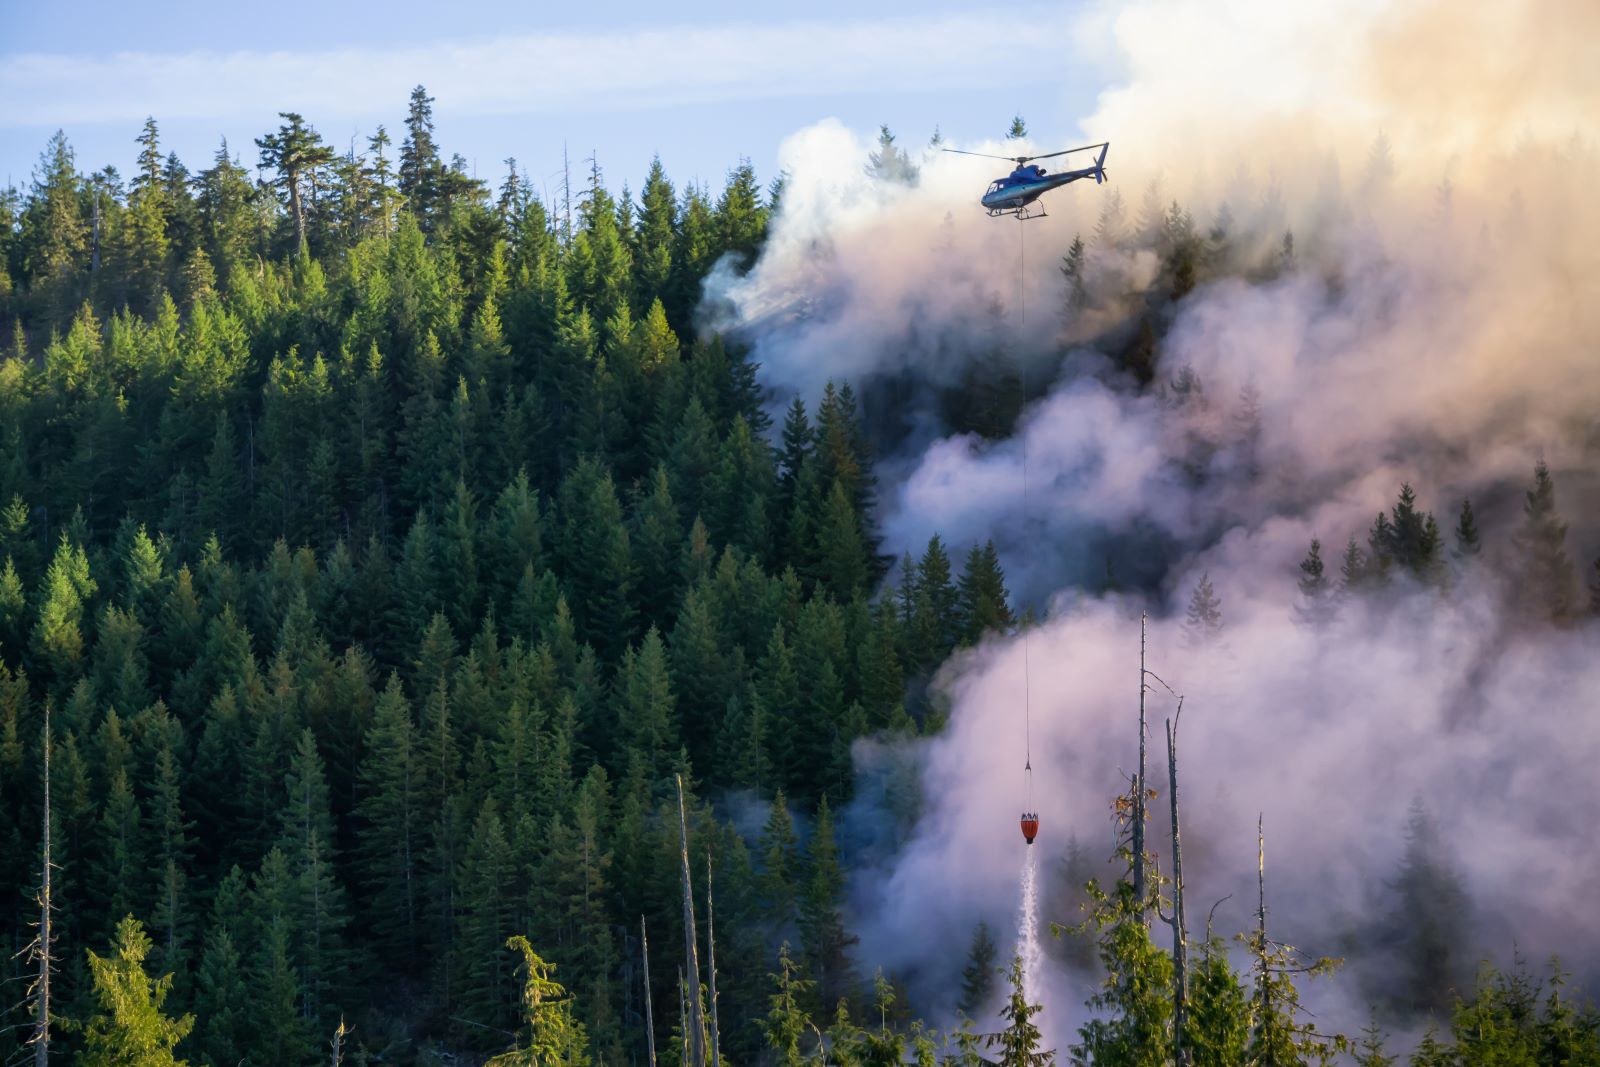 A helicopter flies over a forest with smoke rising from between the trees.